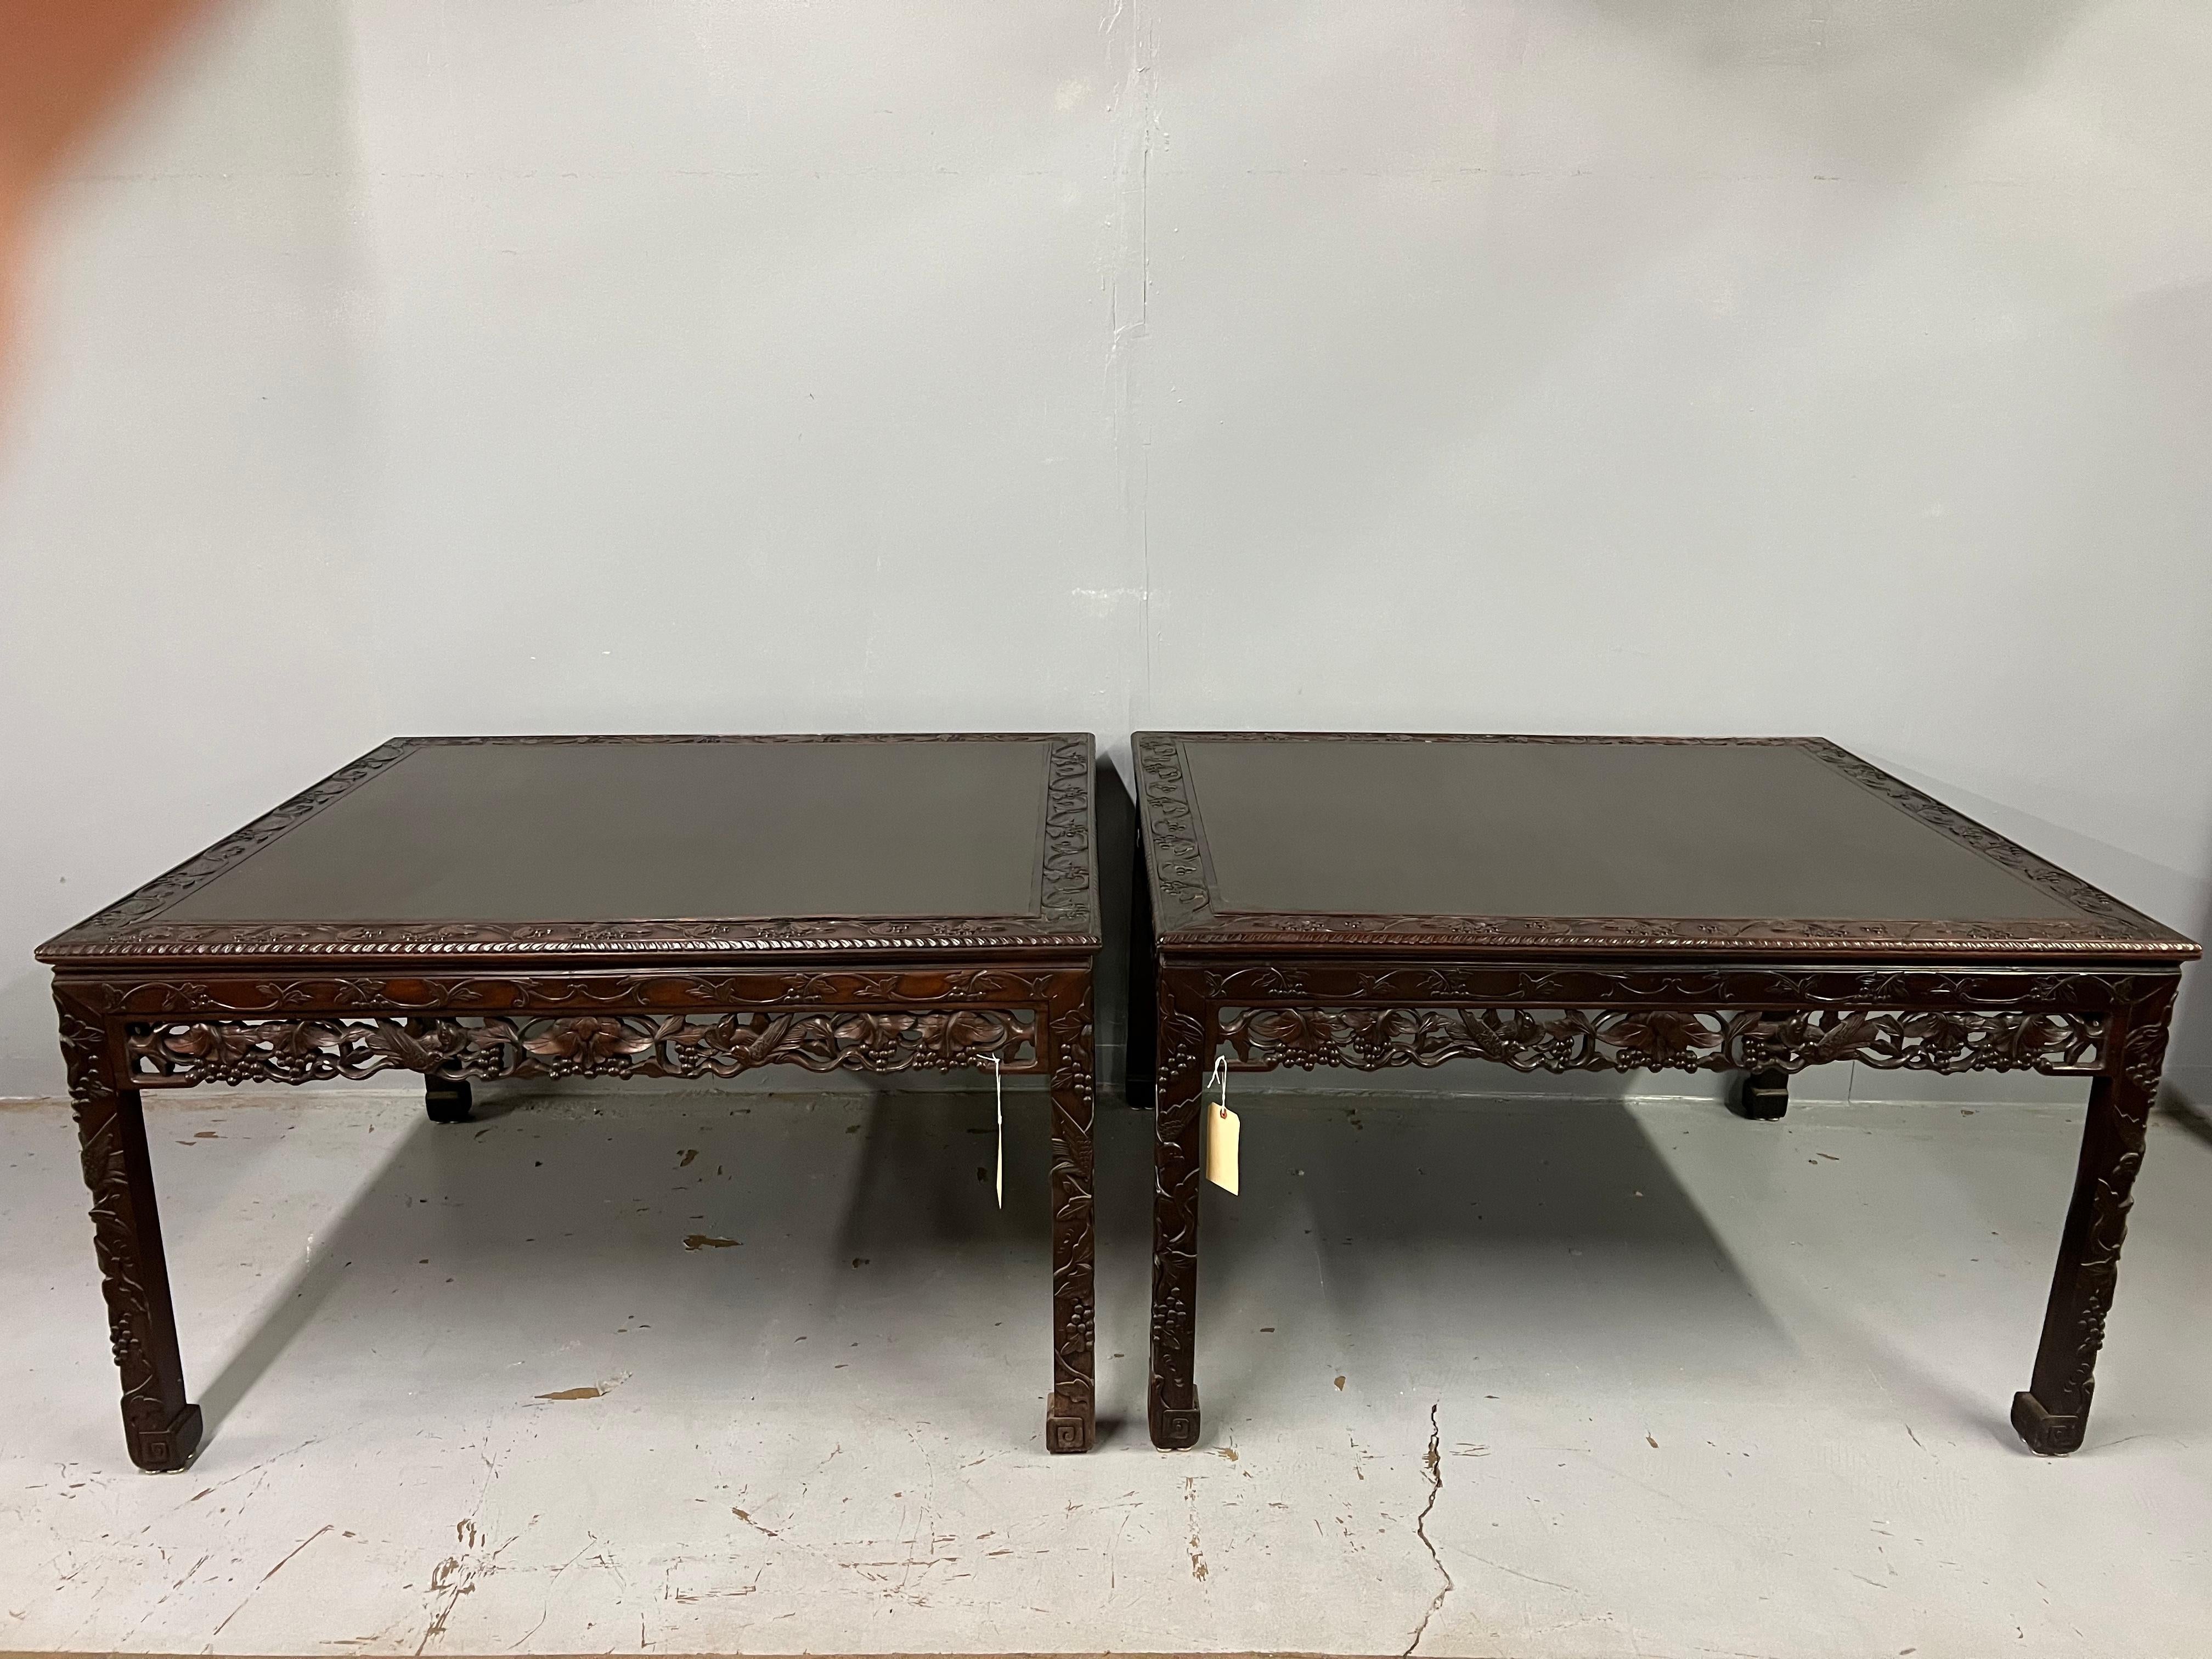 A pair of Chinese carved rosewood center tables that could be used for dining as well. They are part of a suite of dining furniture made Europeans living in China in the early 20th century. These beautifully carved tables are a wonderful size and